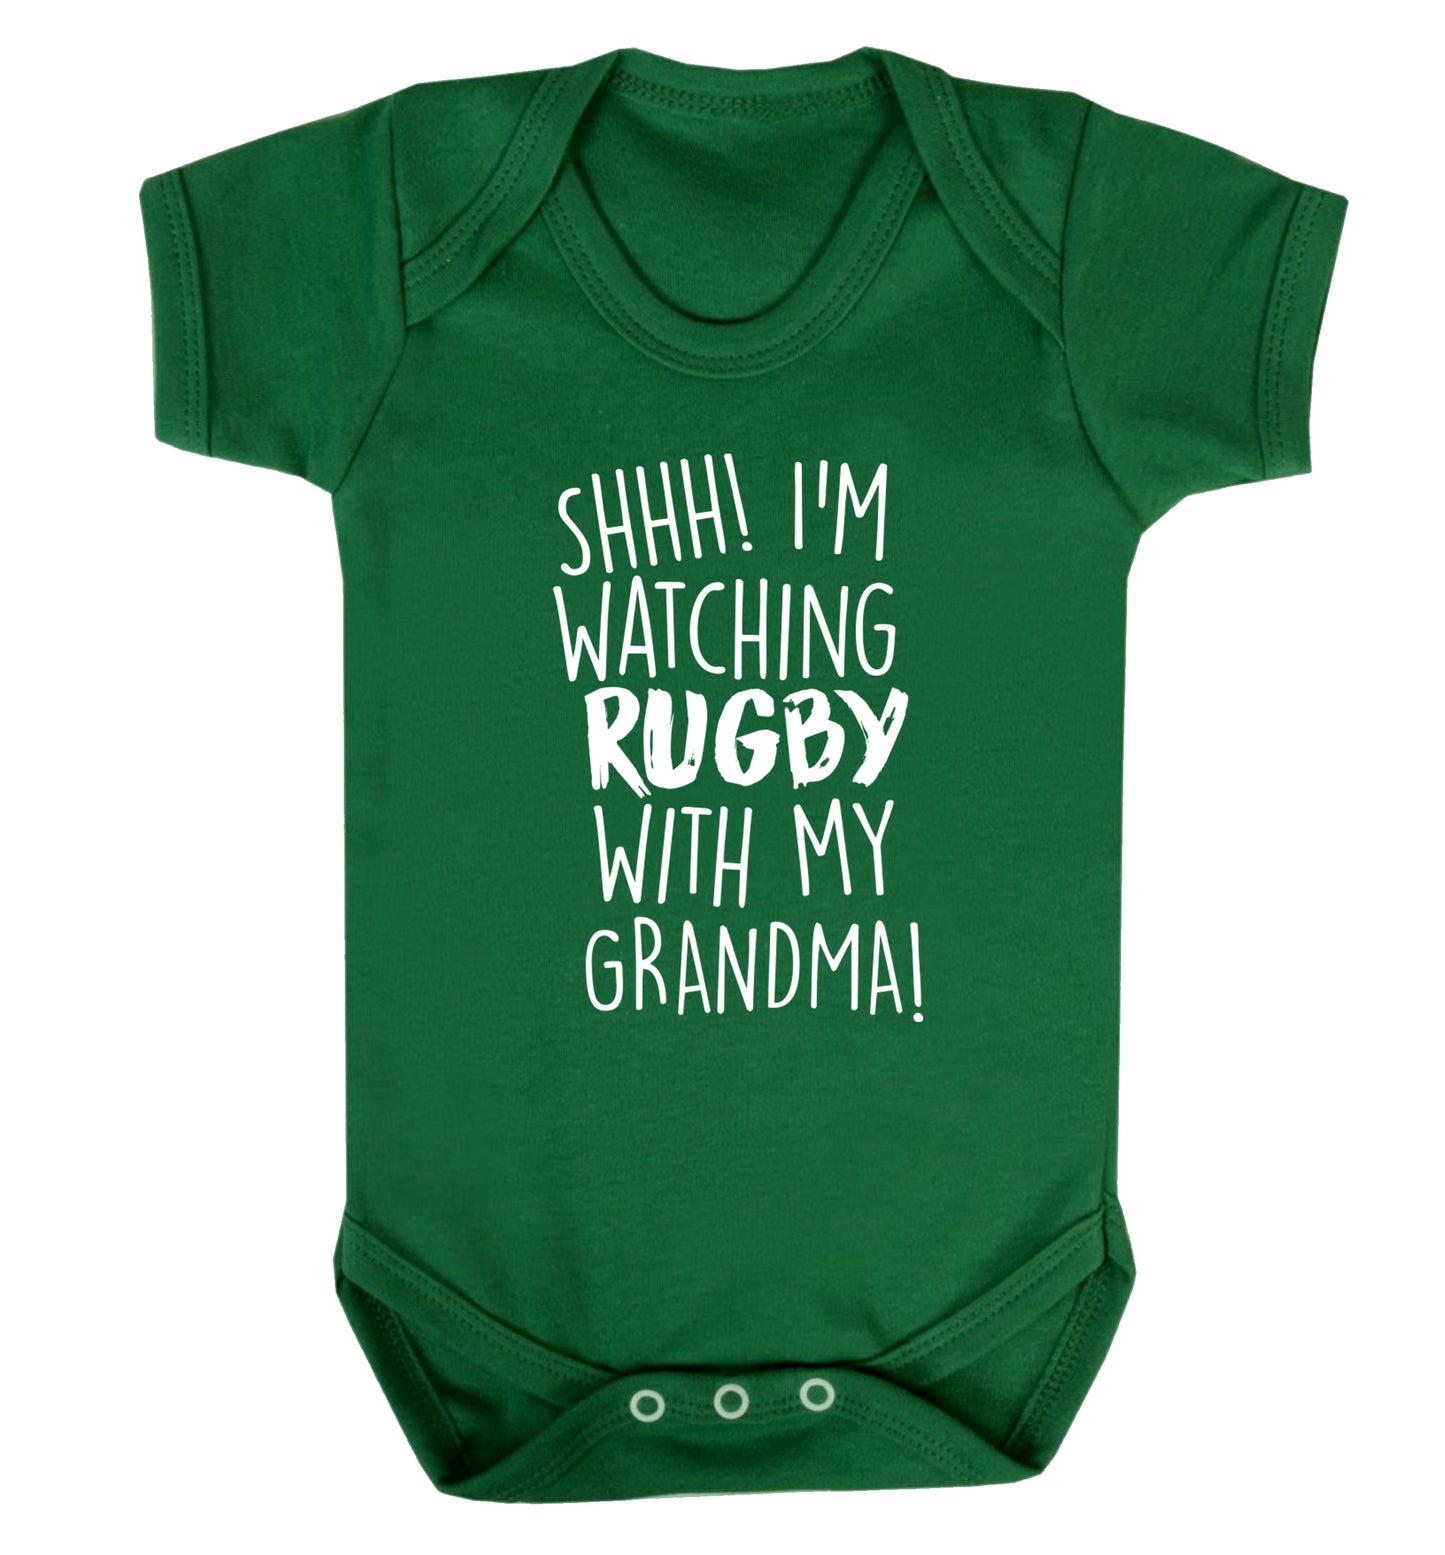 Shh I'm watching rugby with my grandma Baby Vest green 18-24 months